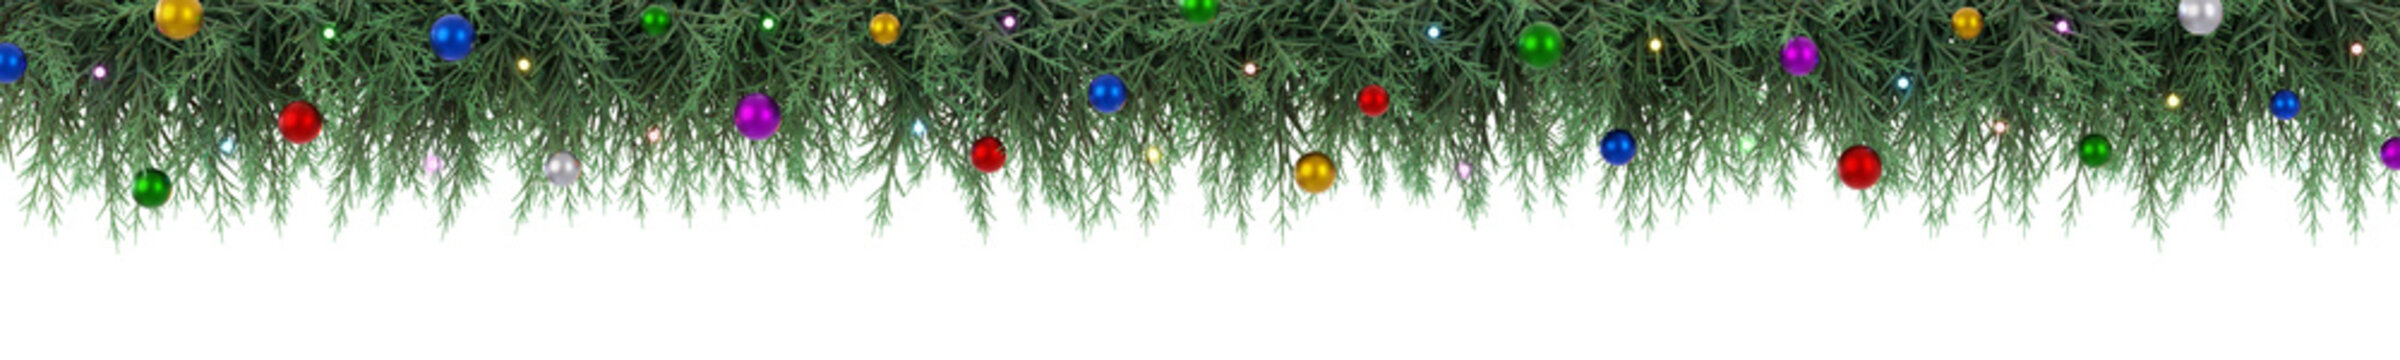 Christmas wide banner decorated with colorful balls and glowing lights. Realistic rendering.